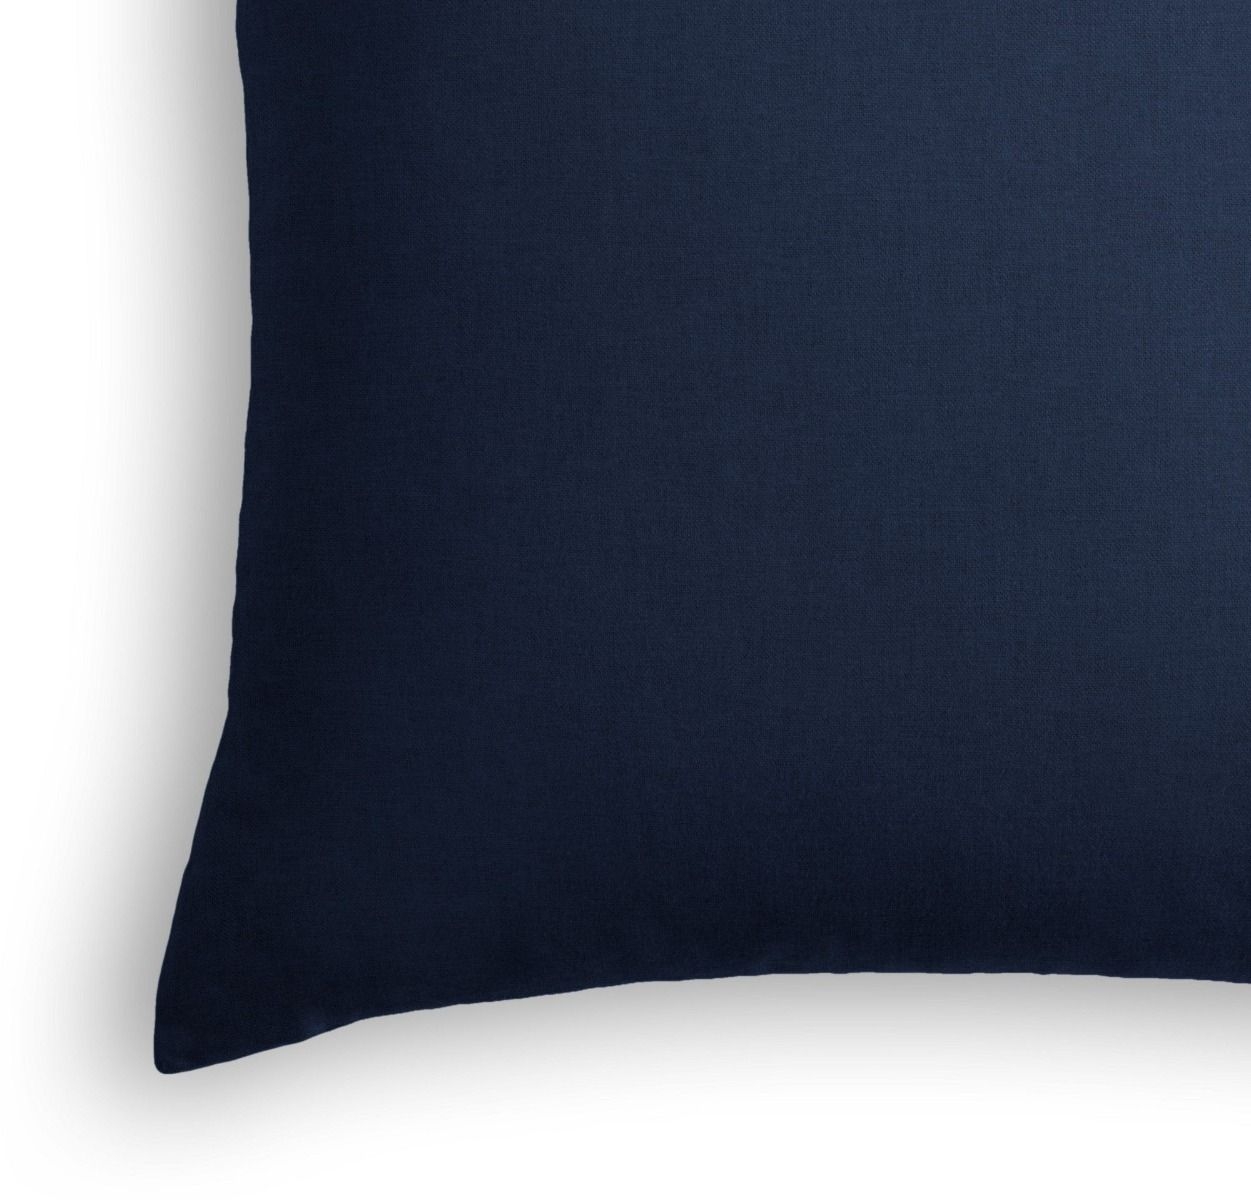 Classic Linen Pillow, Indigo, 22" x 22" with down fill - Image 1